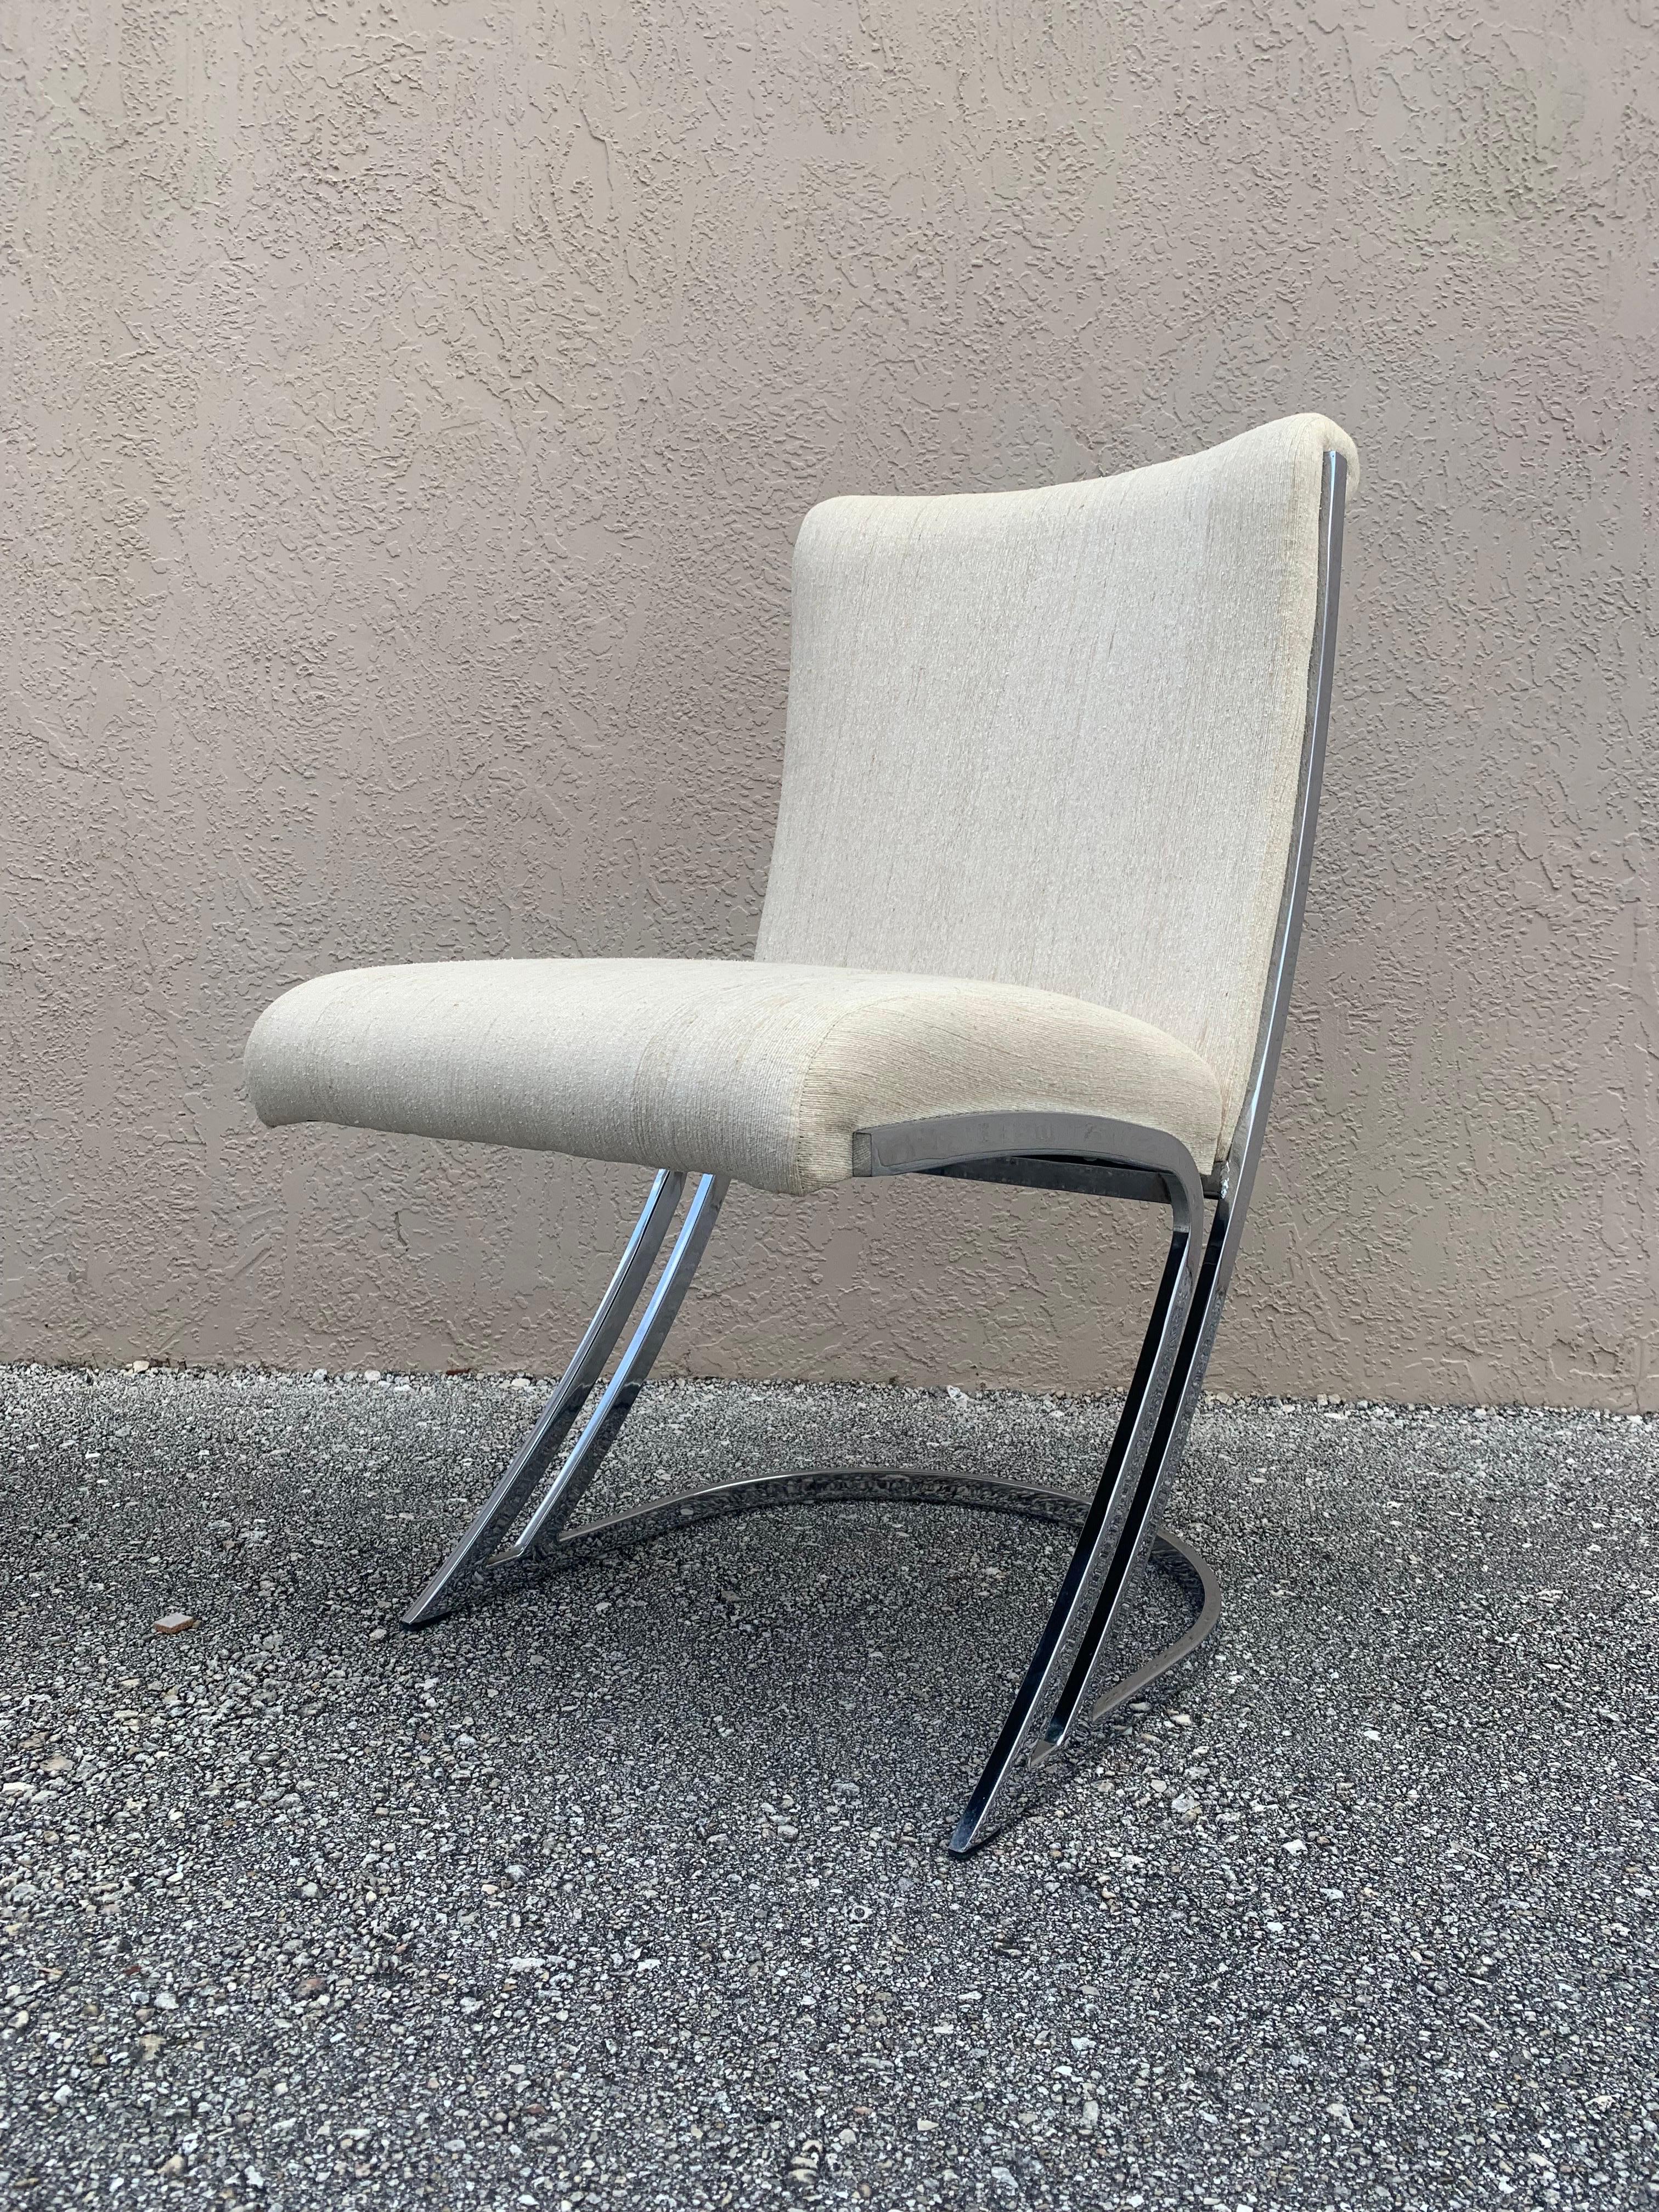 Set of Six Pierre Cardin Crome Dining Chairs, Mid-Century Modern For Sale 2